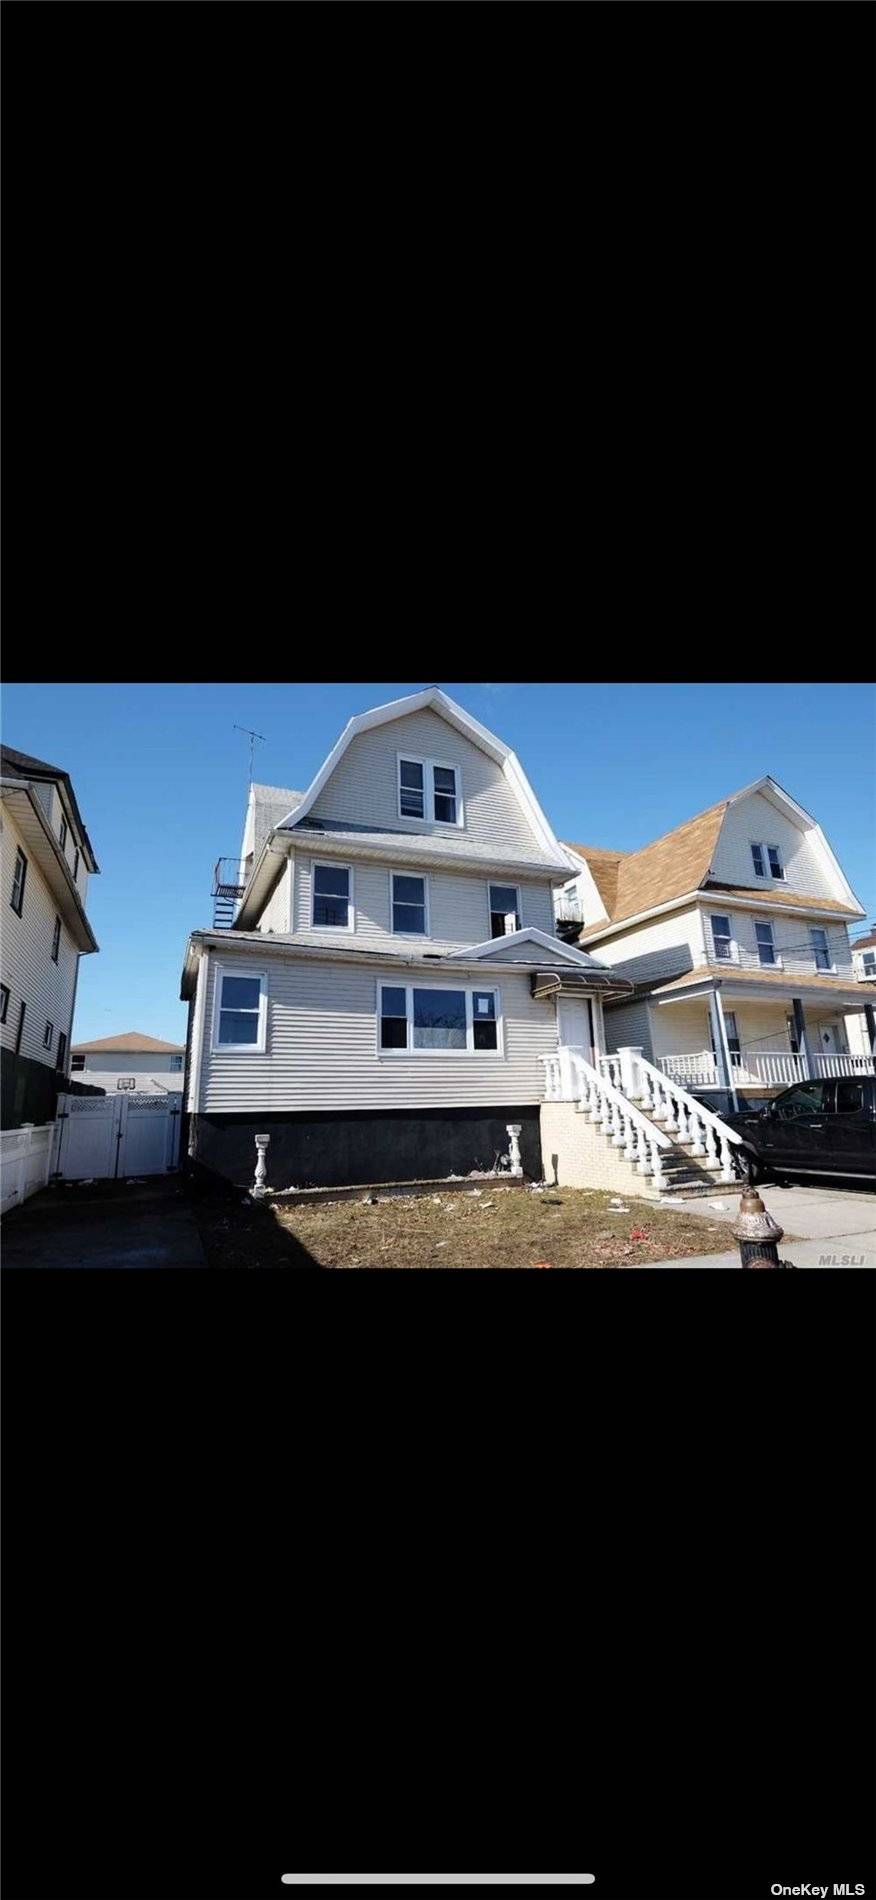 Introducing 519 Beach 66th St, Far Rockaway, 11692 a charming three family property located within walking distance to the beach.